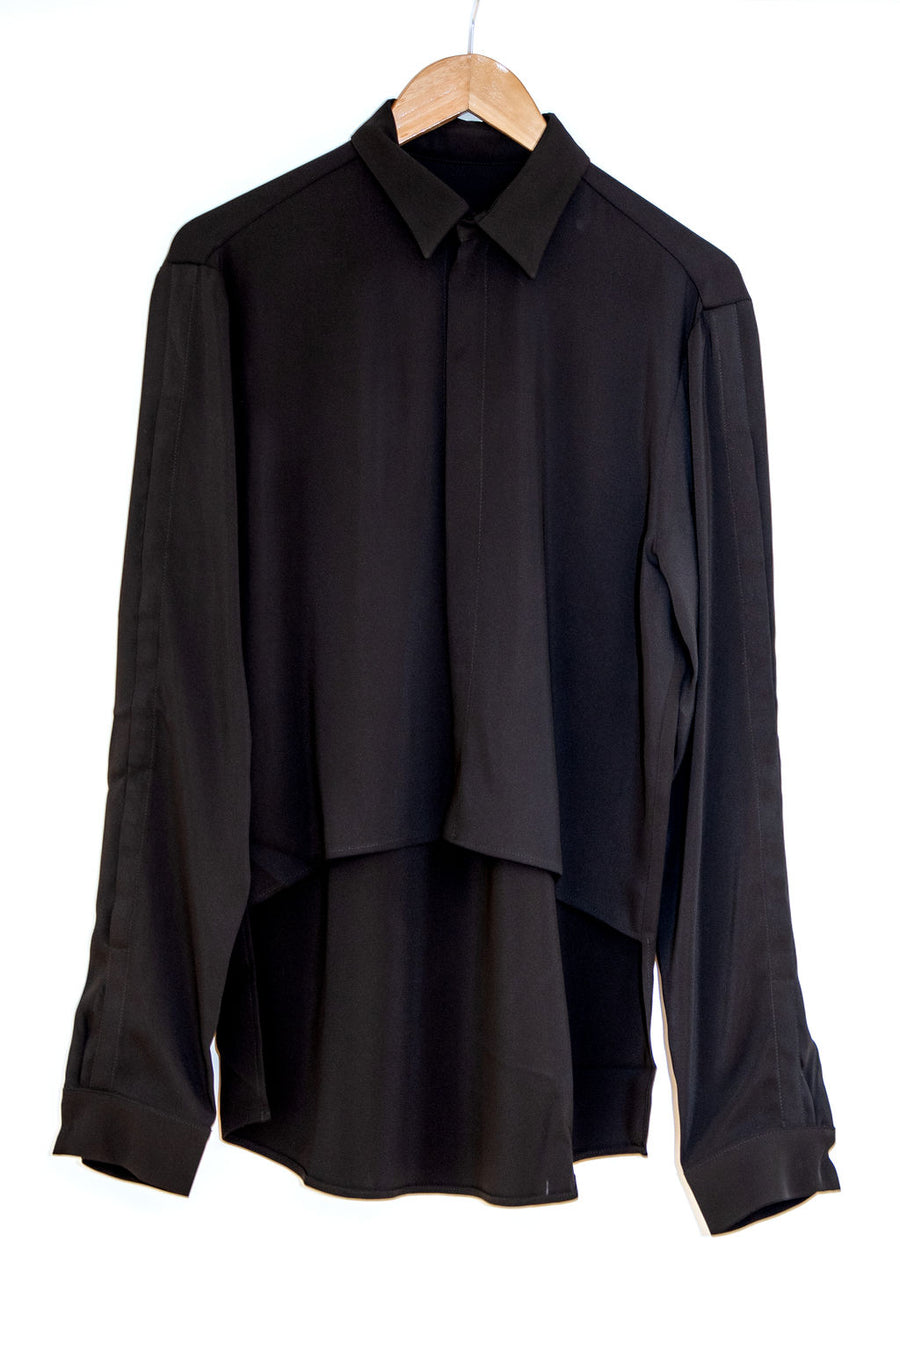 Black lyocell shirt on a wooden hanger against white background. Concealed front fastening and sleeve opening.